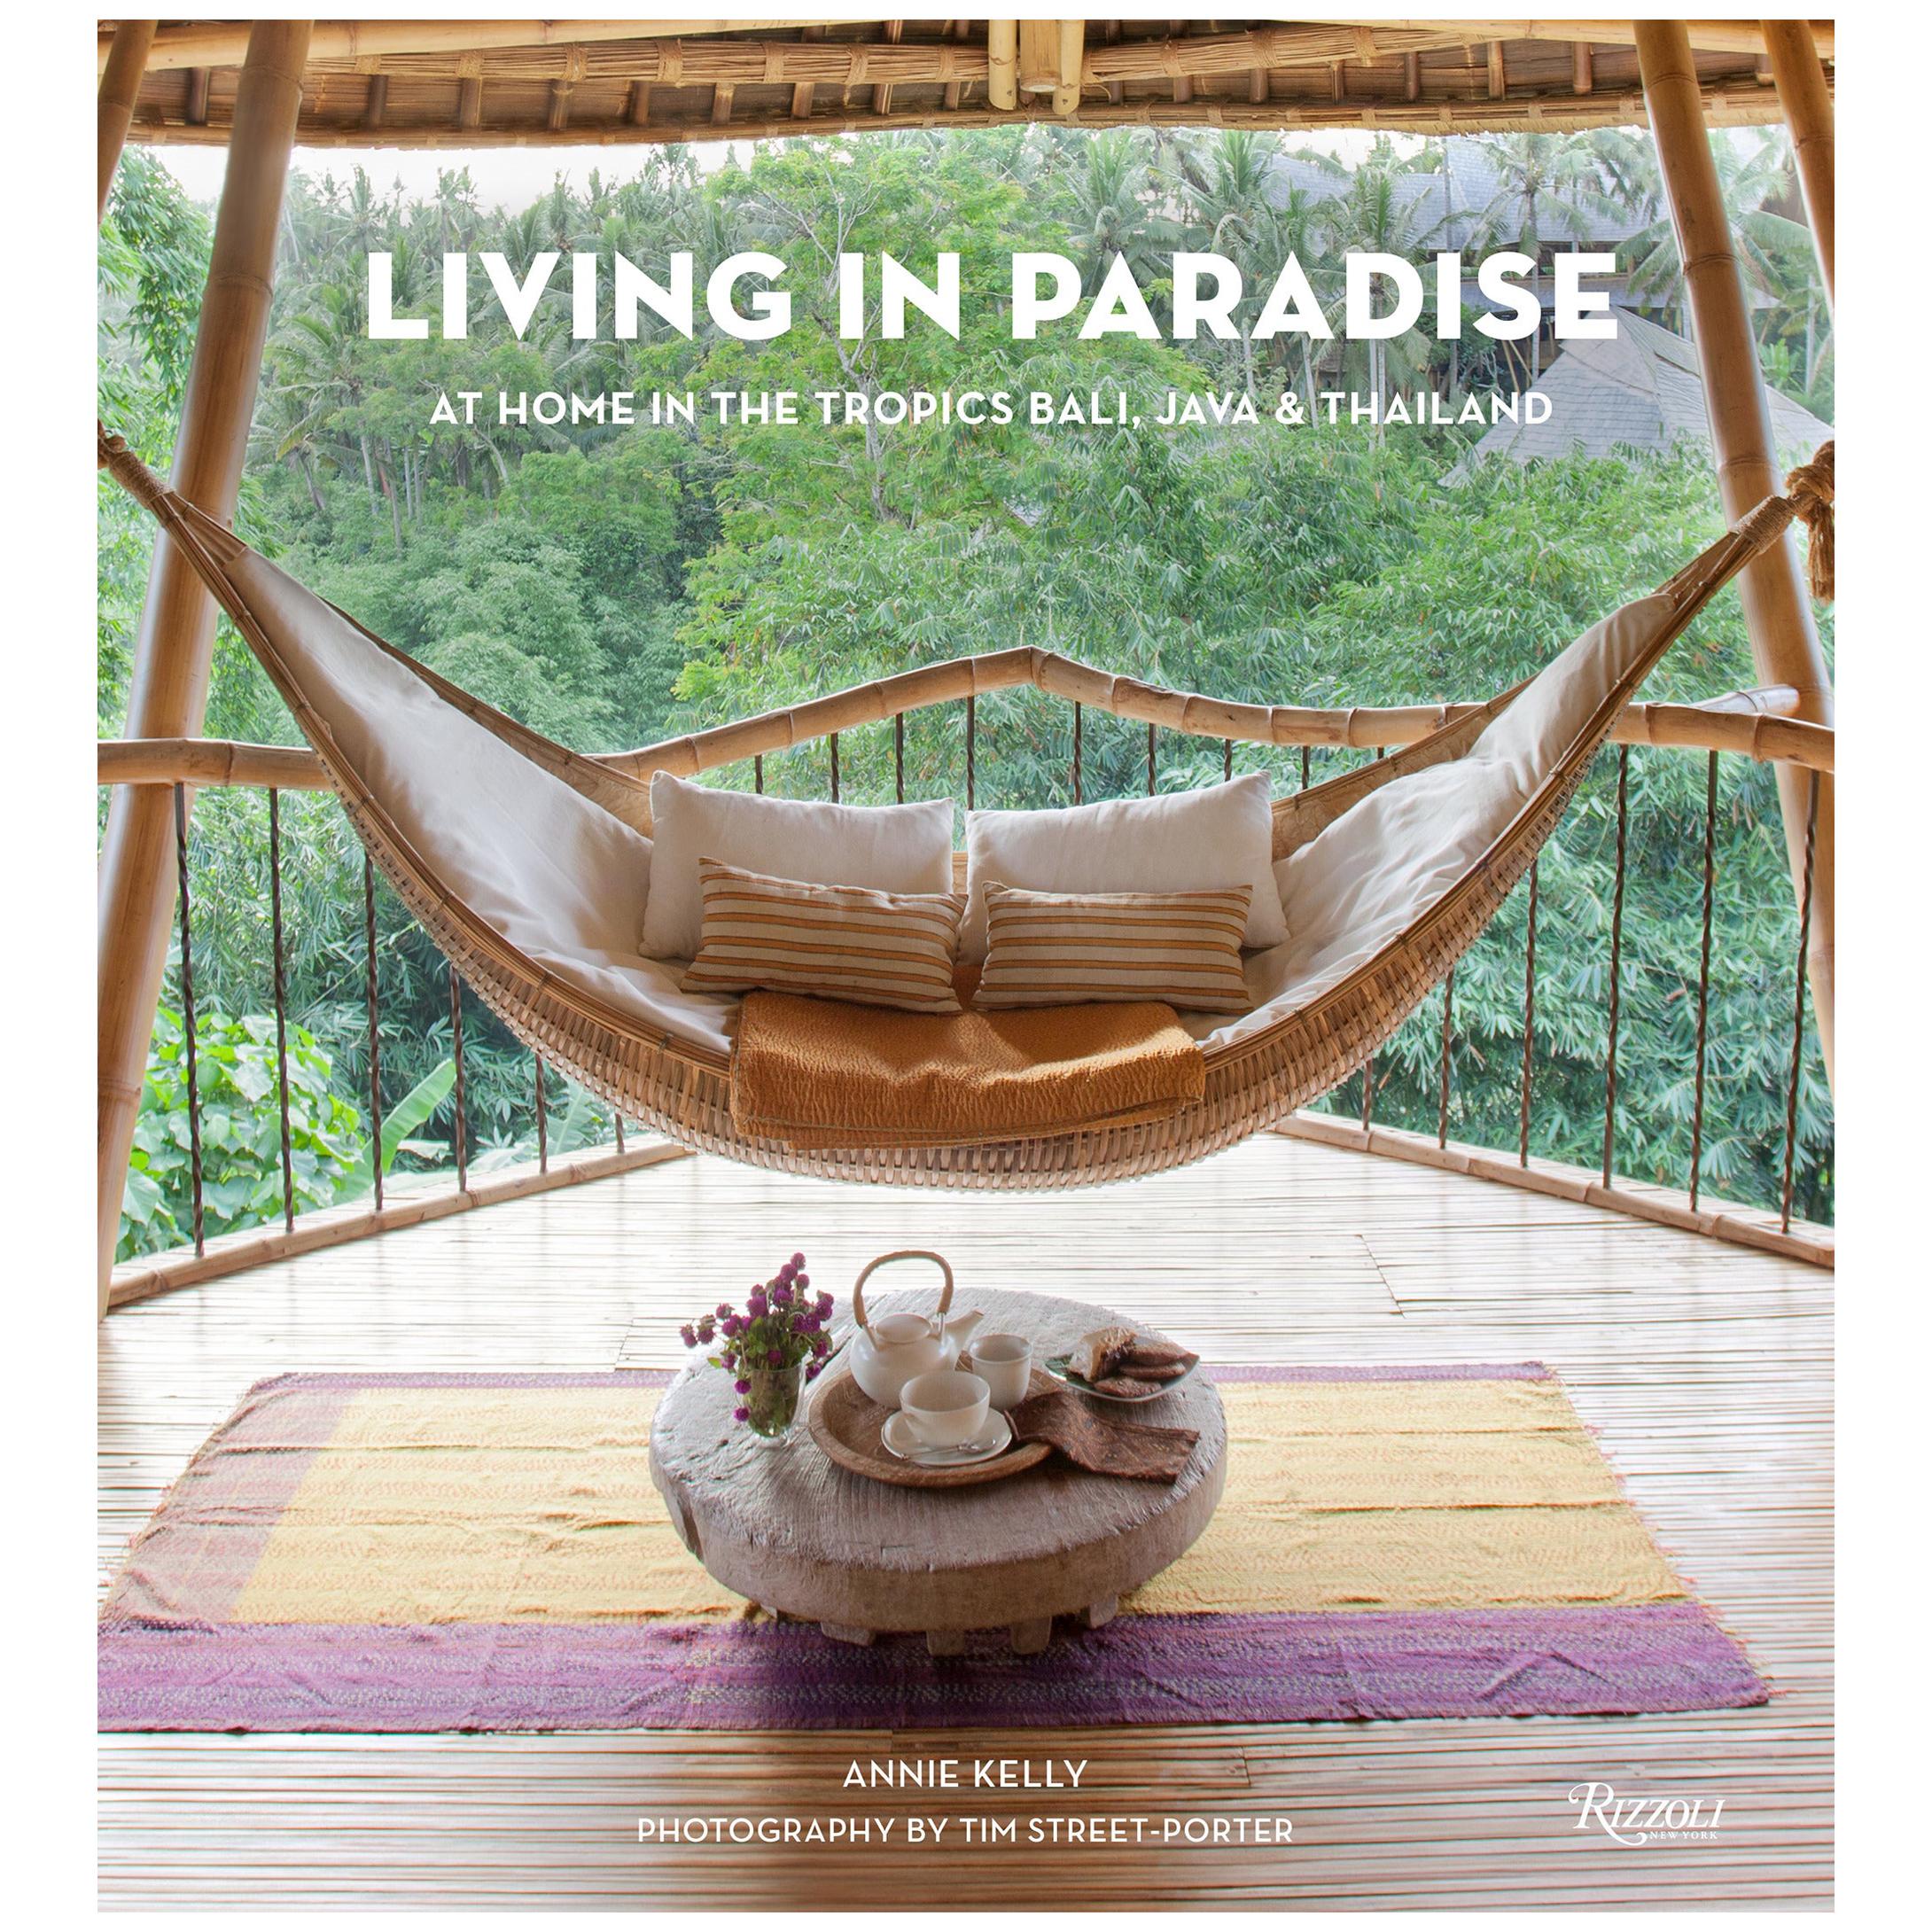 Living in Paradise At Home in the Tropics Bali, Java, Thailand